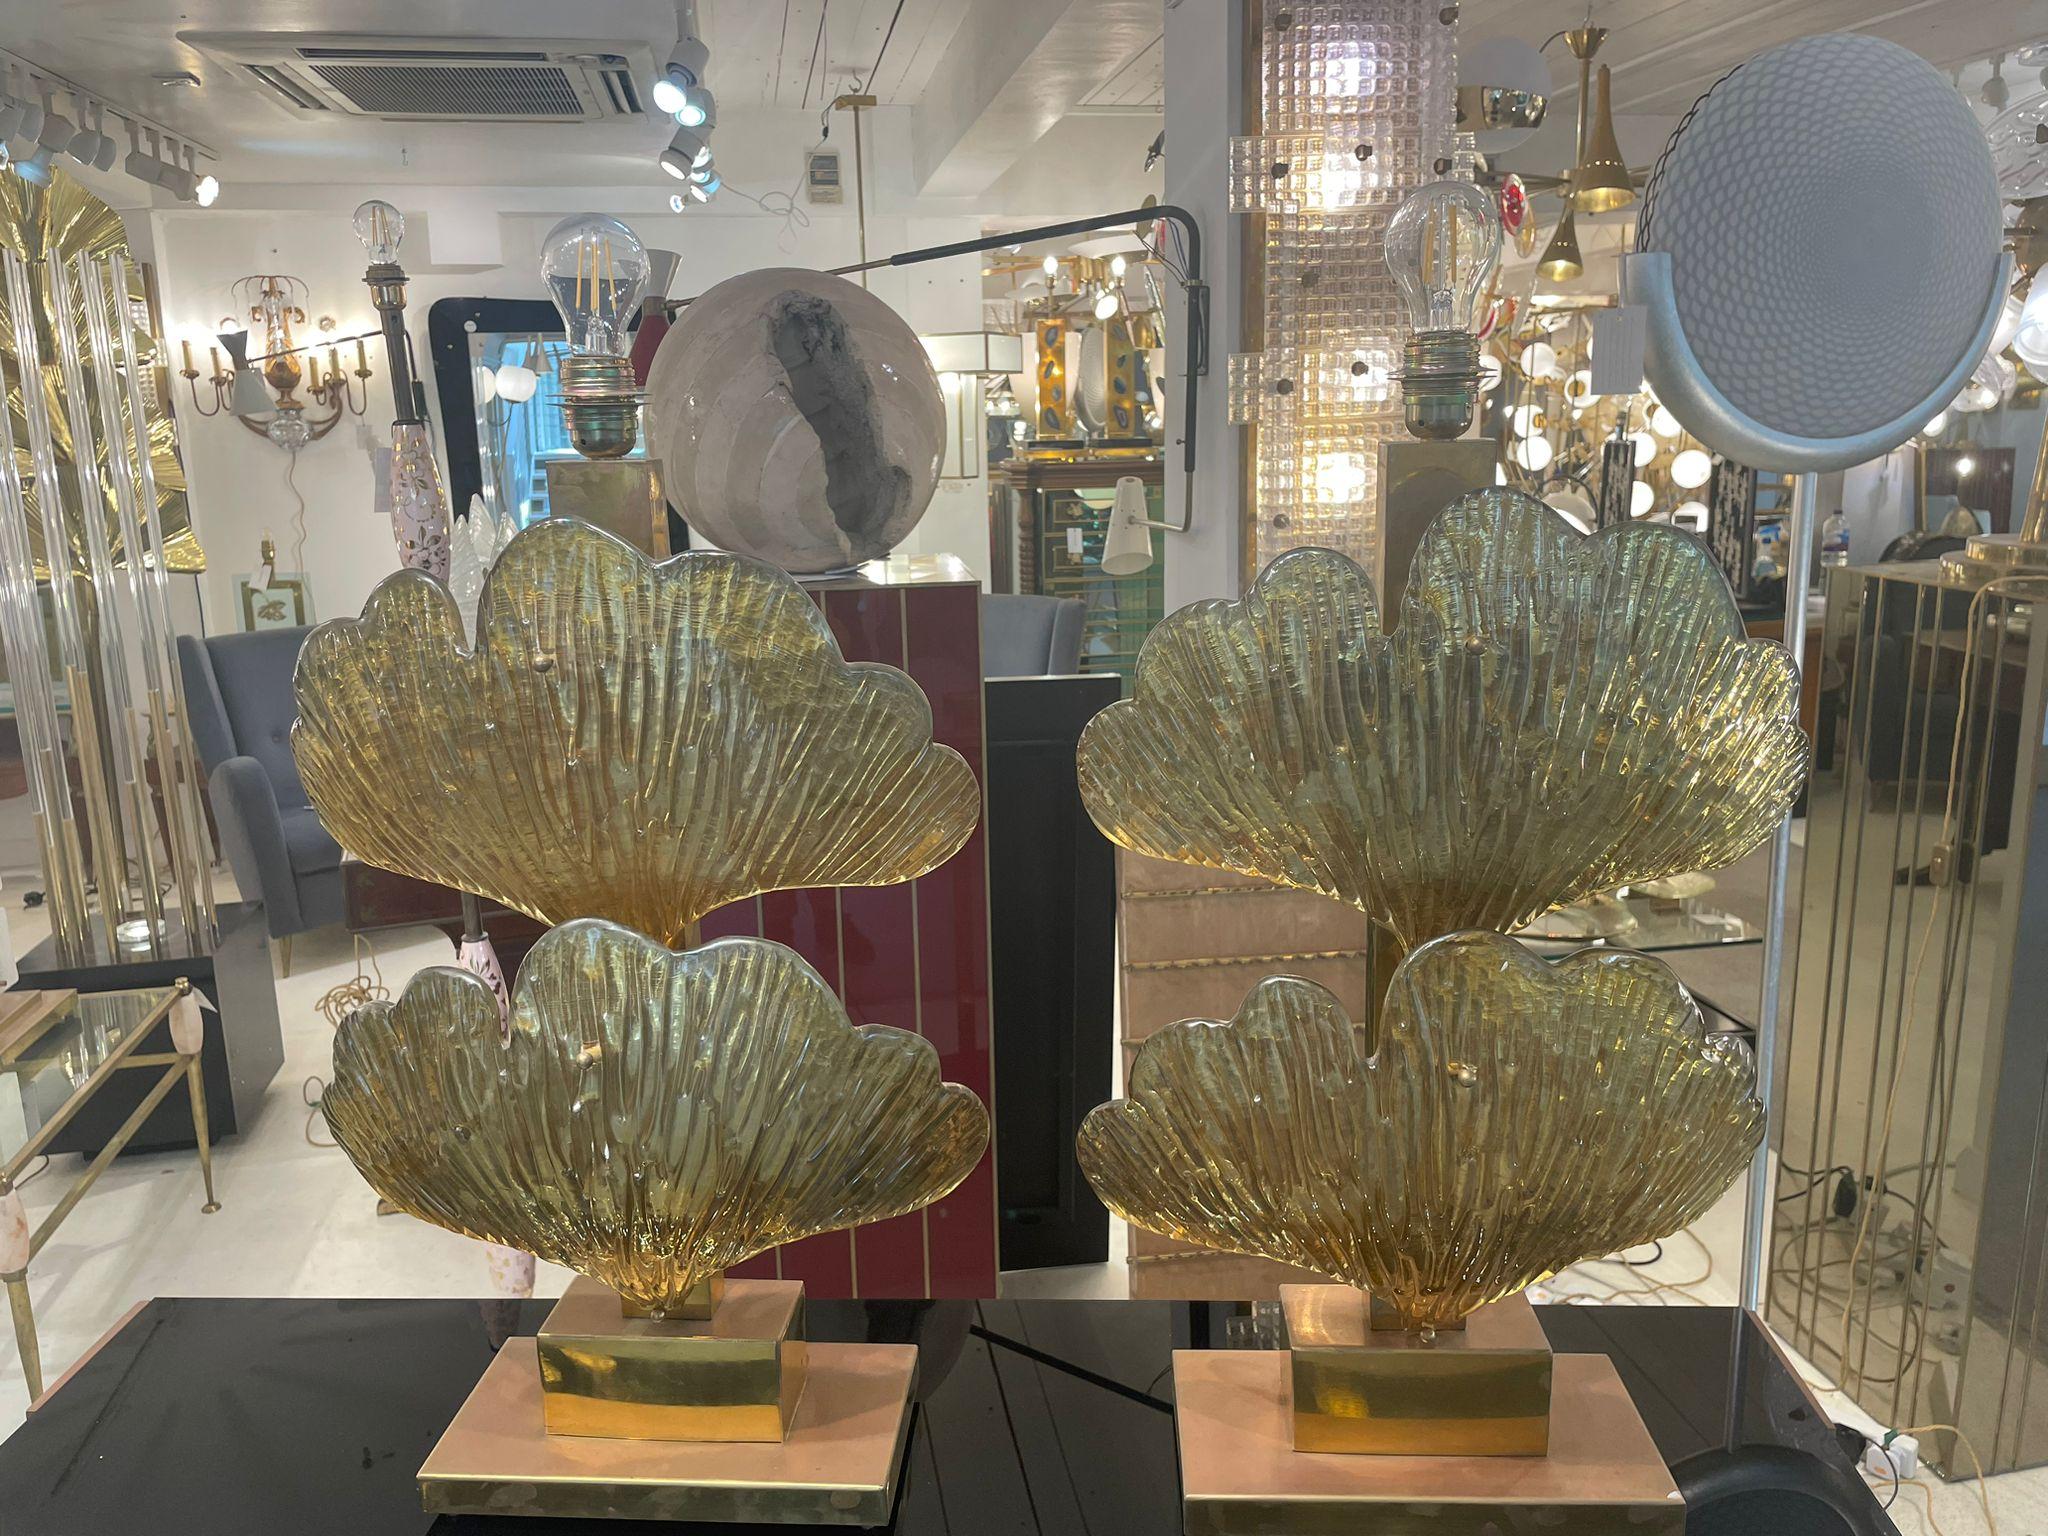 An outstanding decorative pair of tall Italian Ginkgo table lamps in Murano glass mounted on brass, circa 1980.